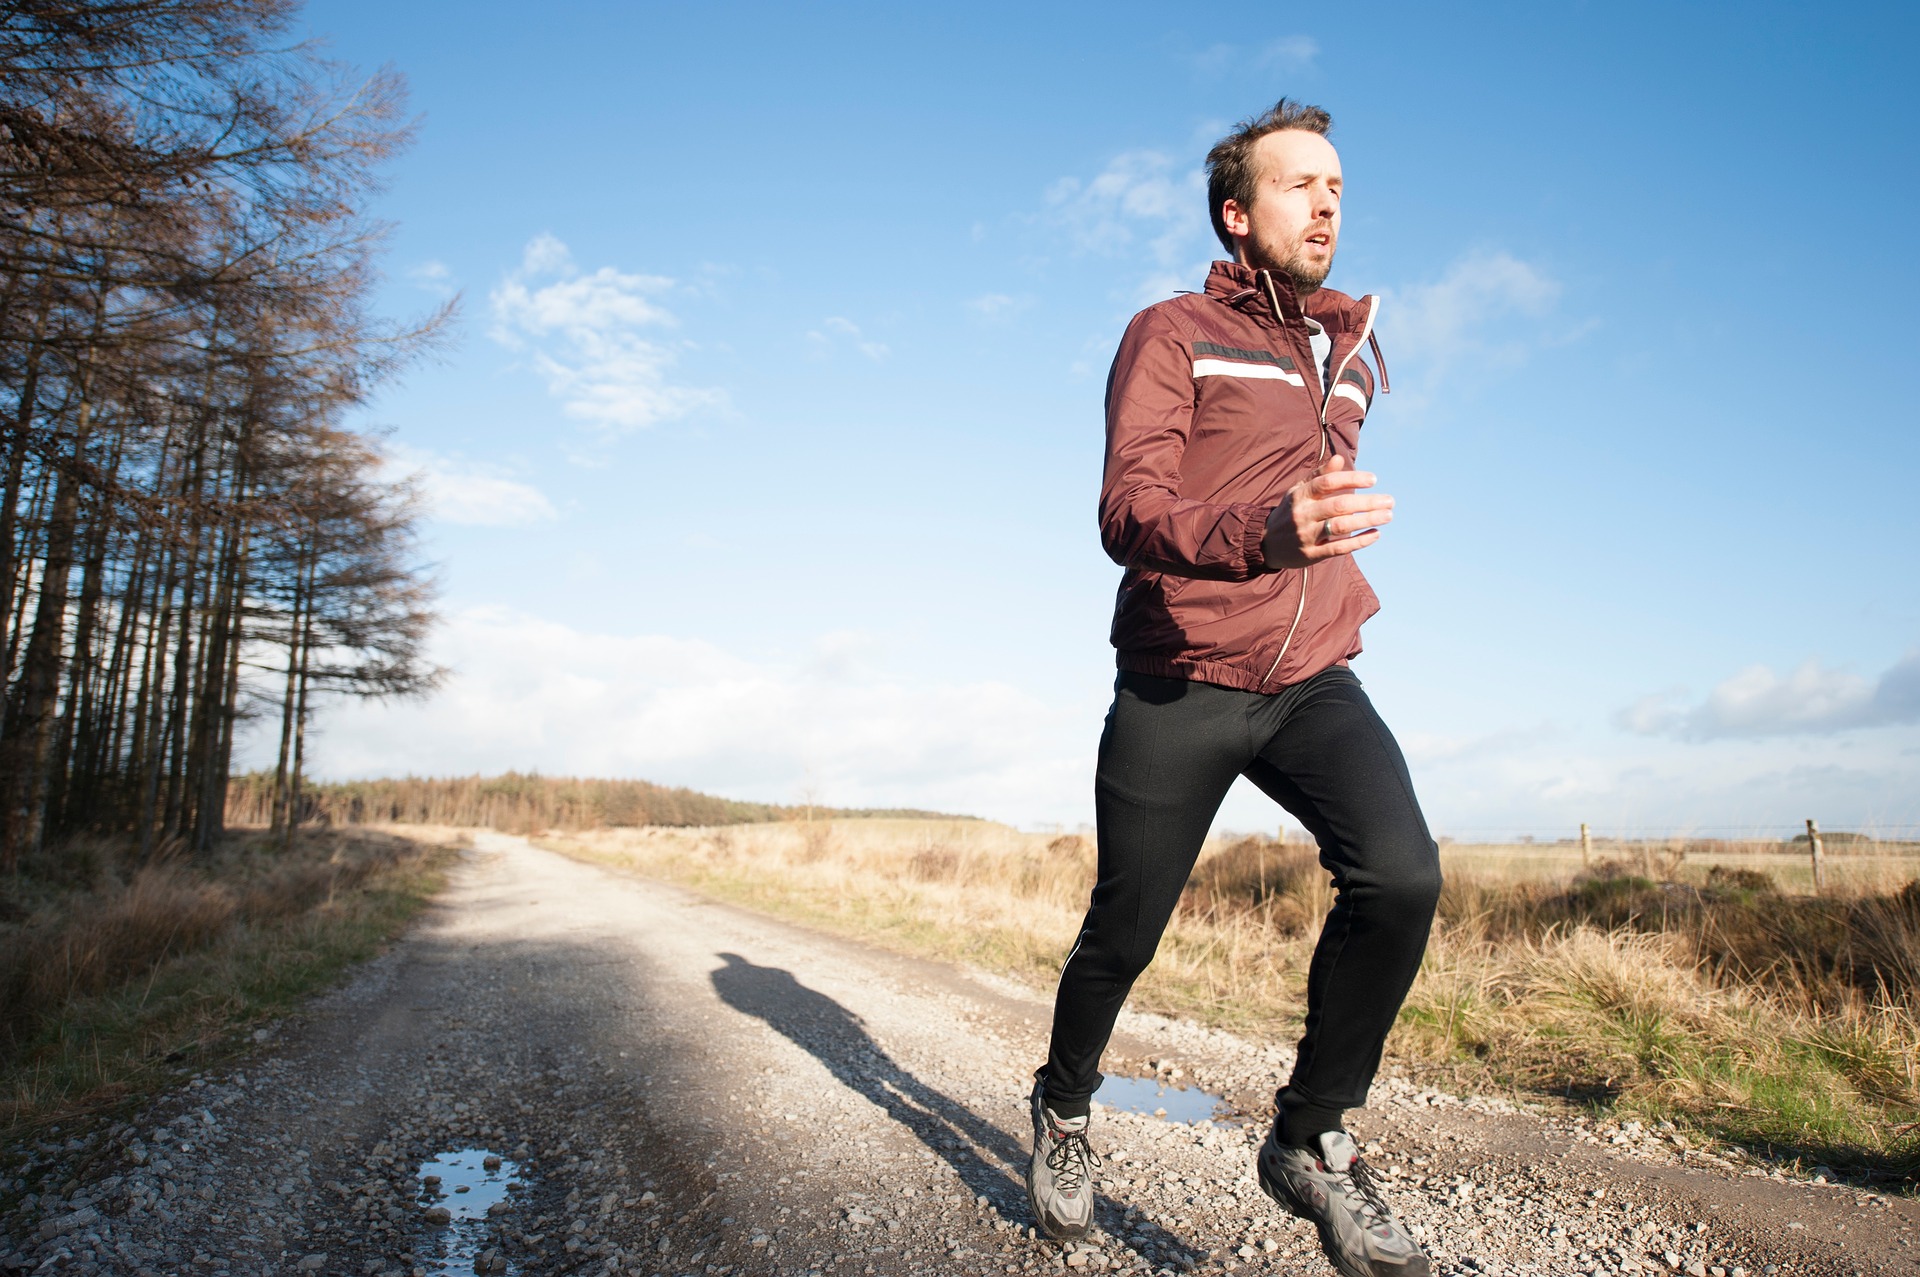 Beginners Guide To Running Gear: The 8 Essential Items You Need // Long Run Living